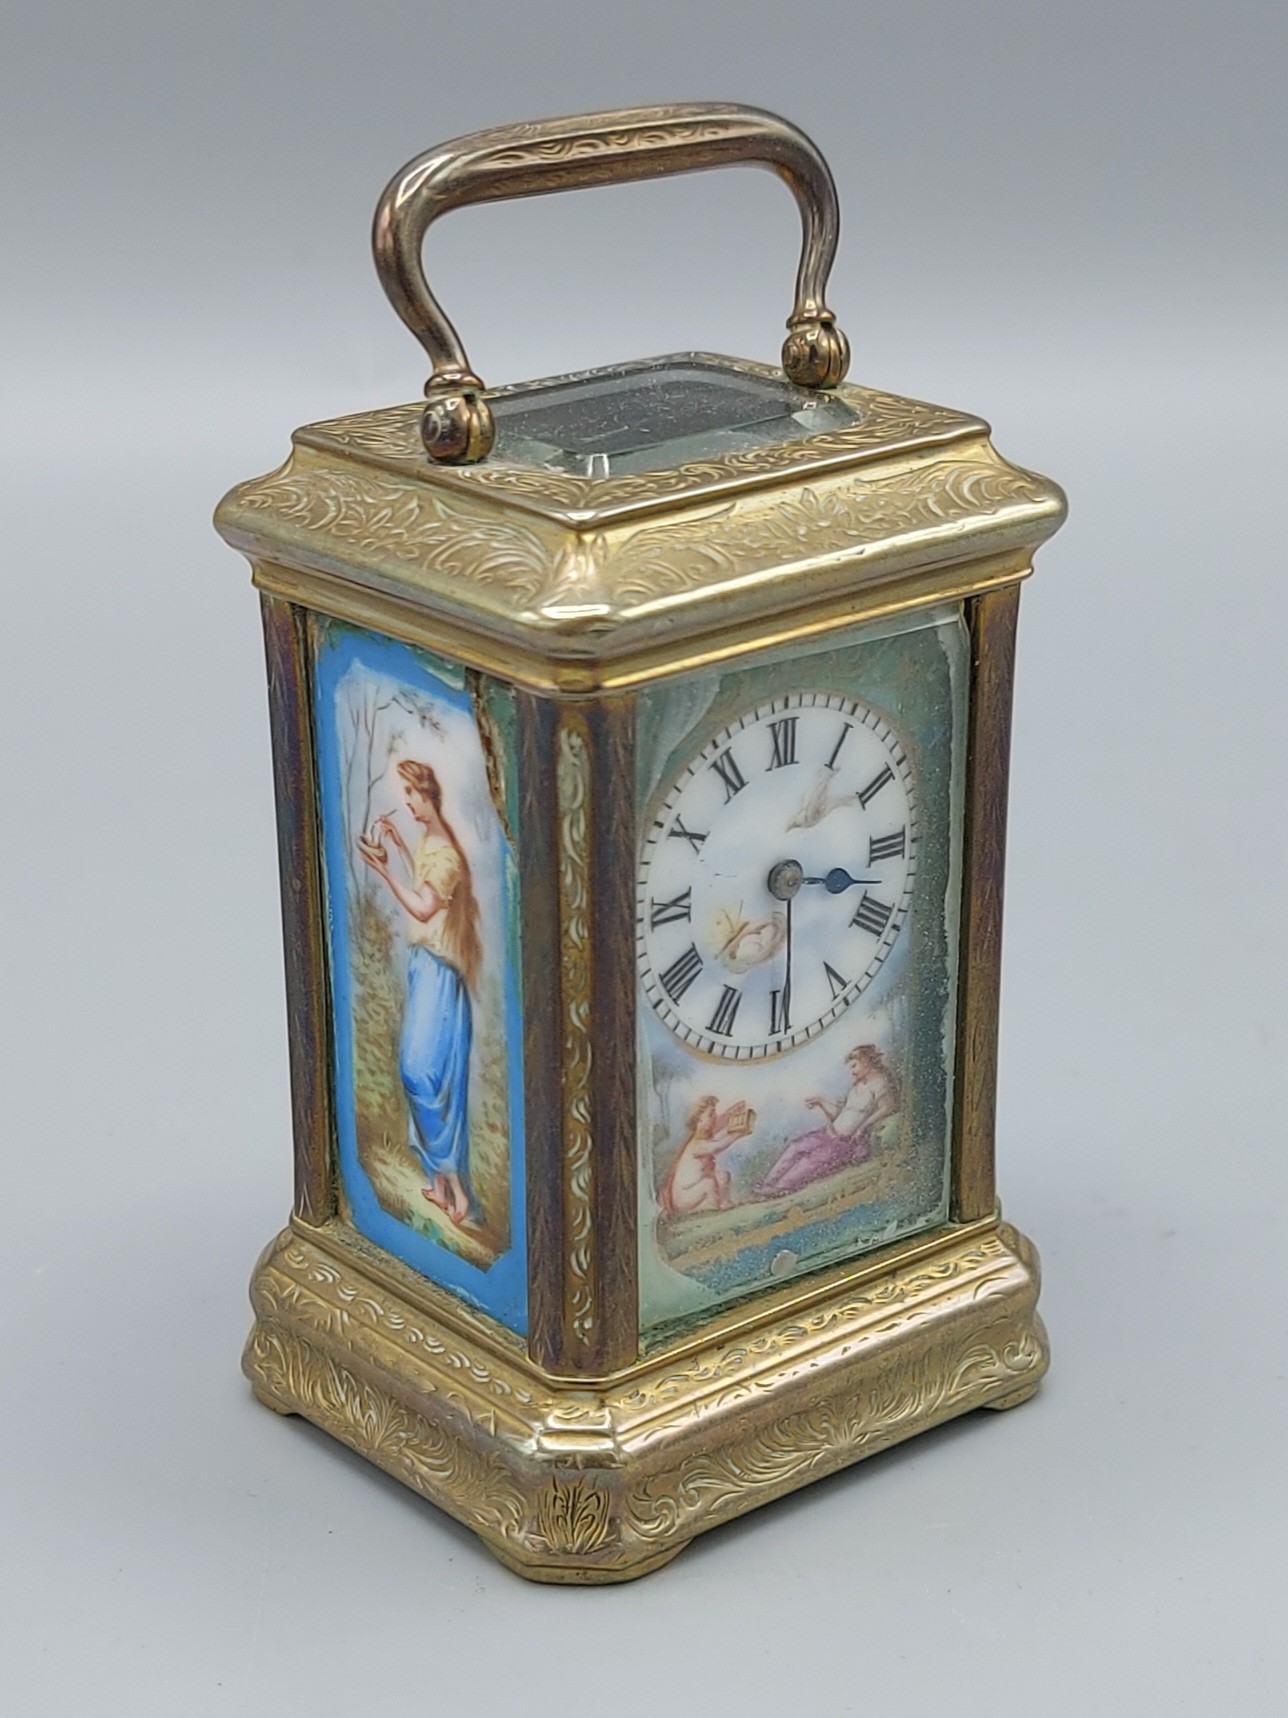 A French brass cased miniature Carriage clock with porcelain panels, lever escapement and carrying